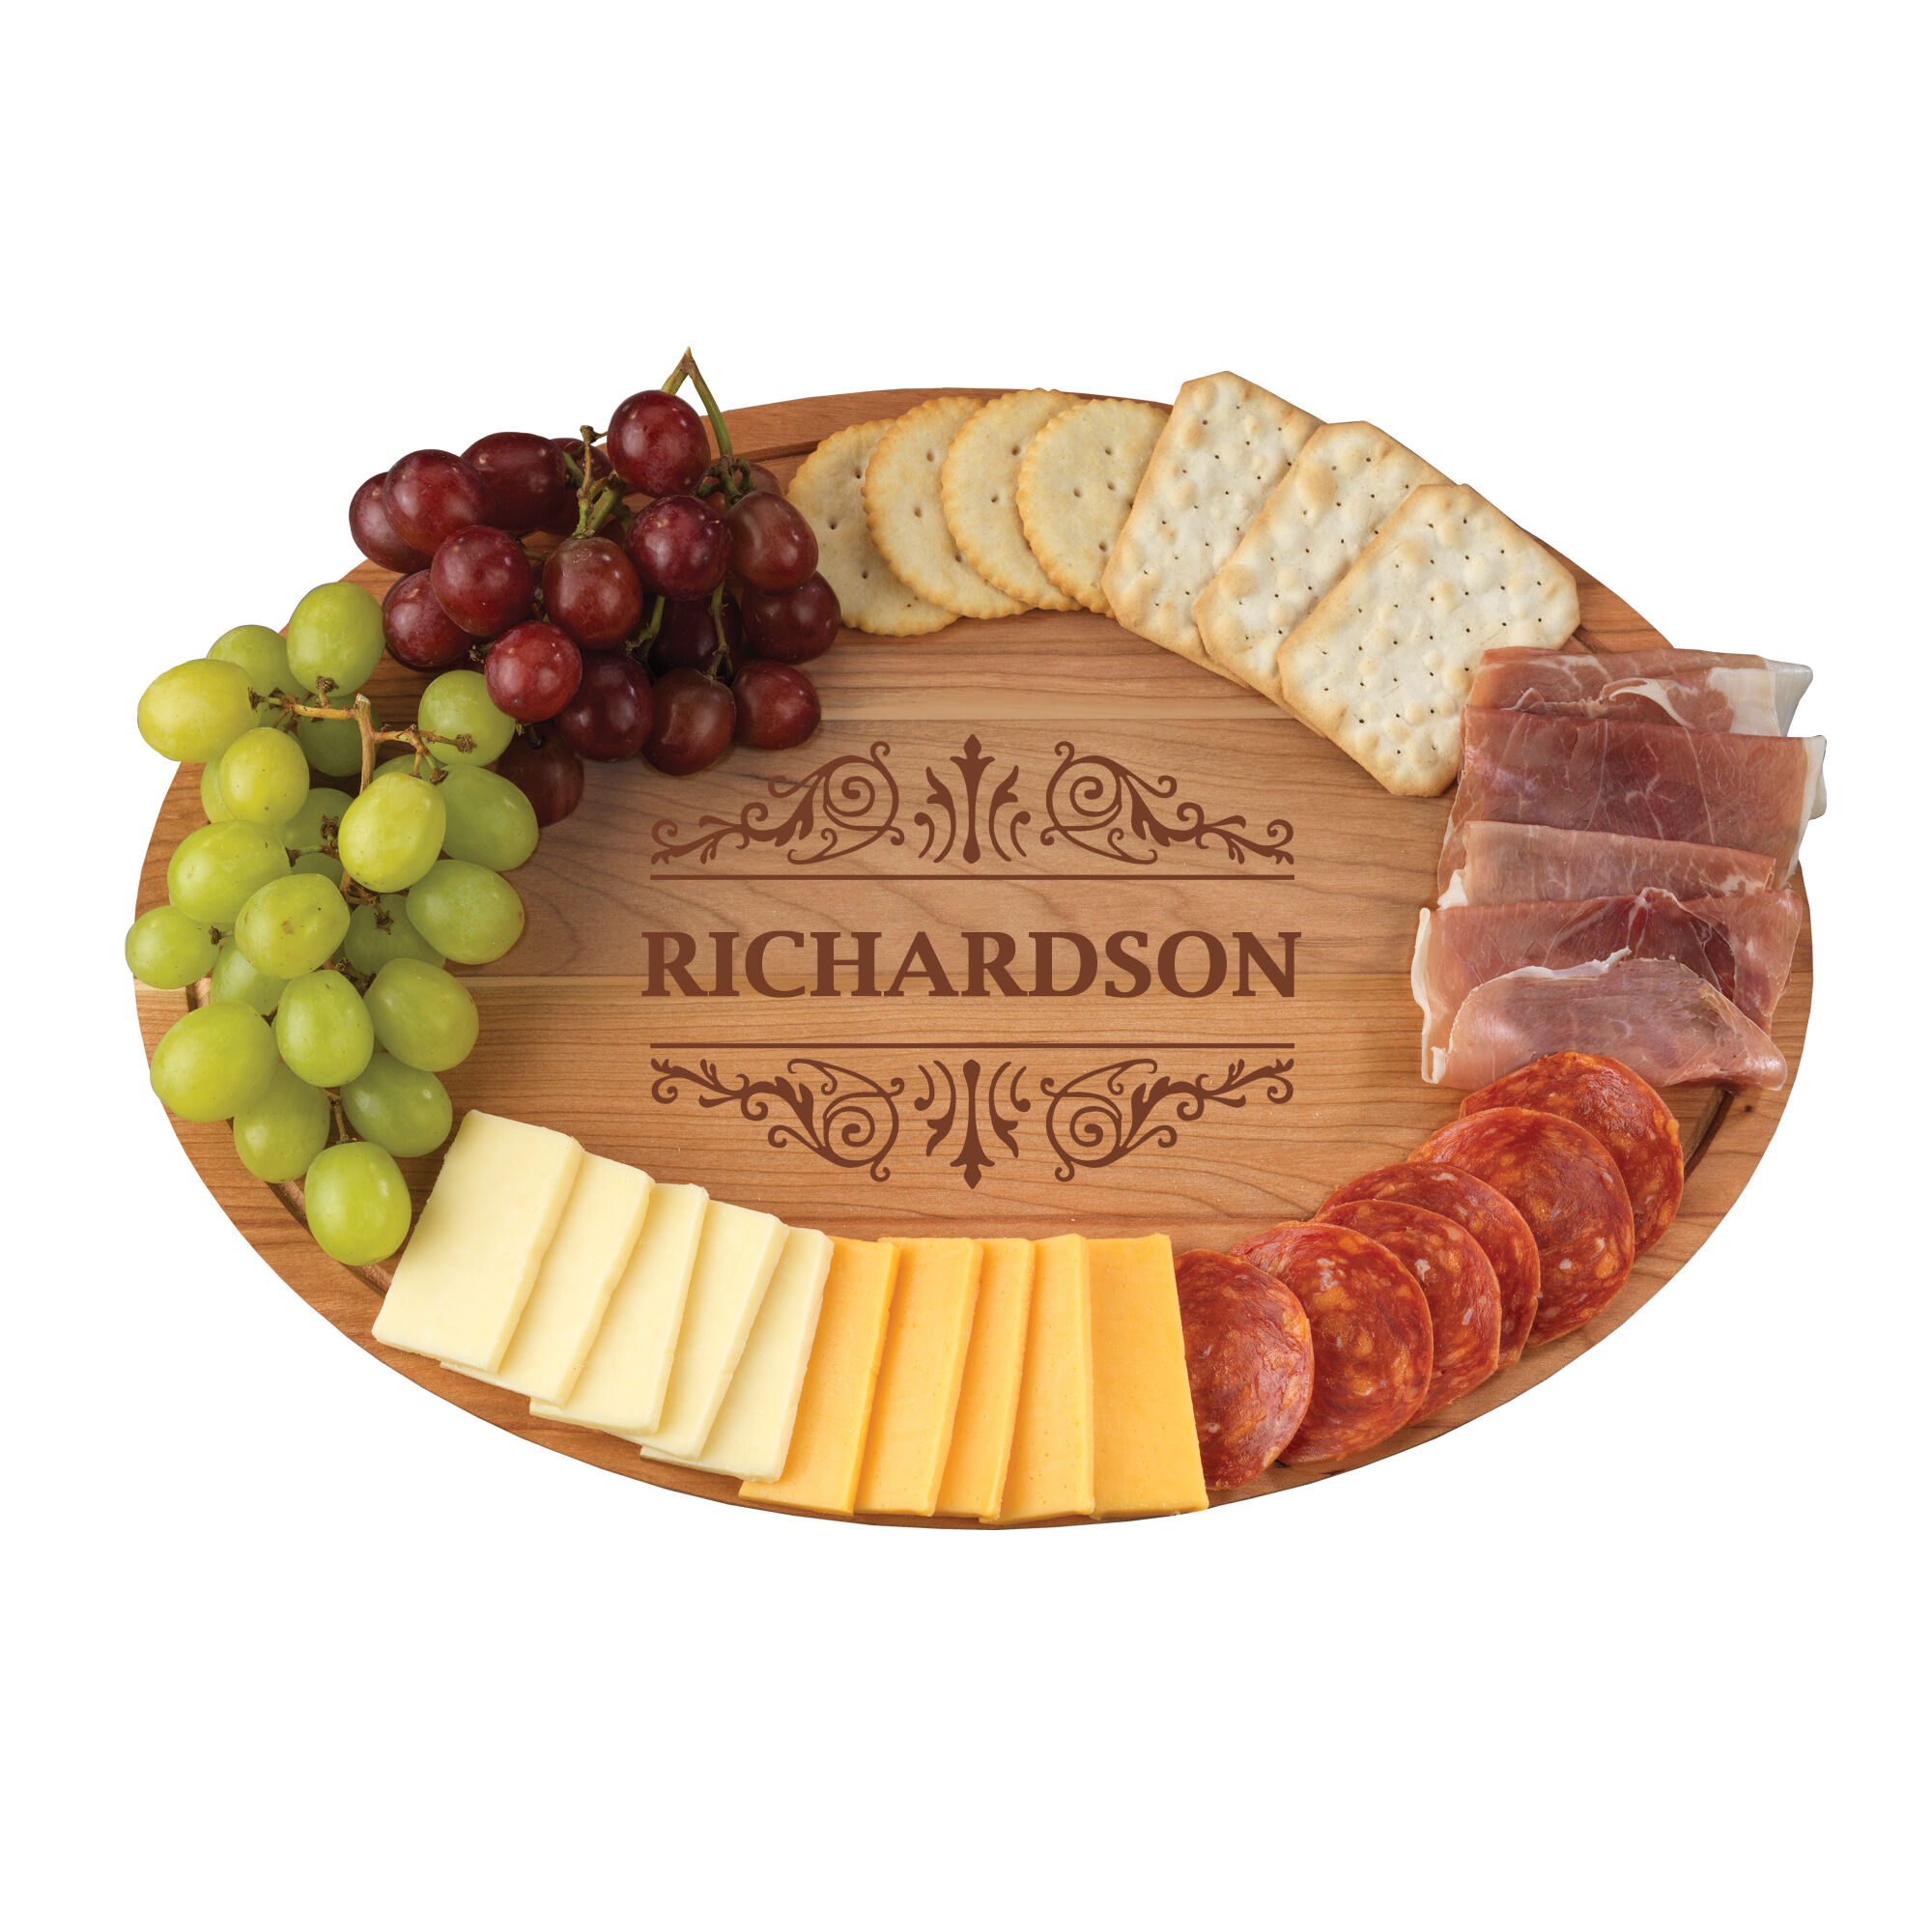 The Personalized Deluxe Serving Board 5611 0018 b cuttingboard